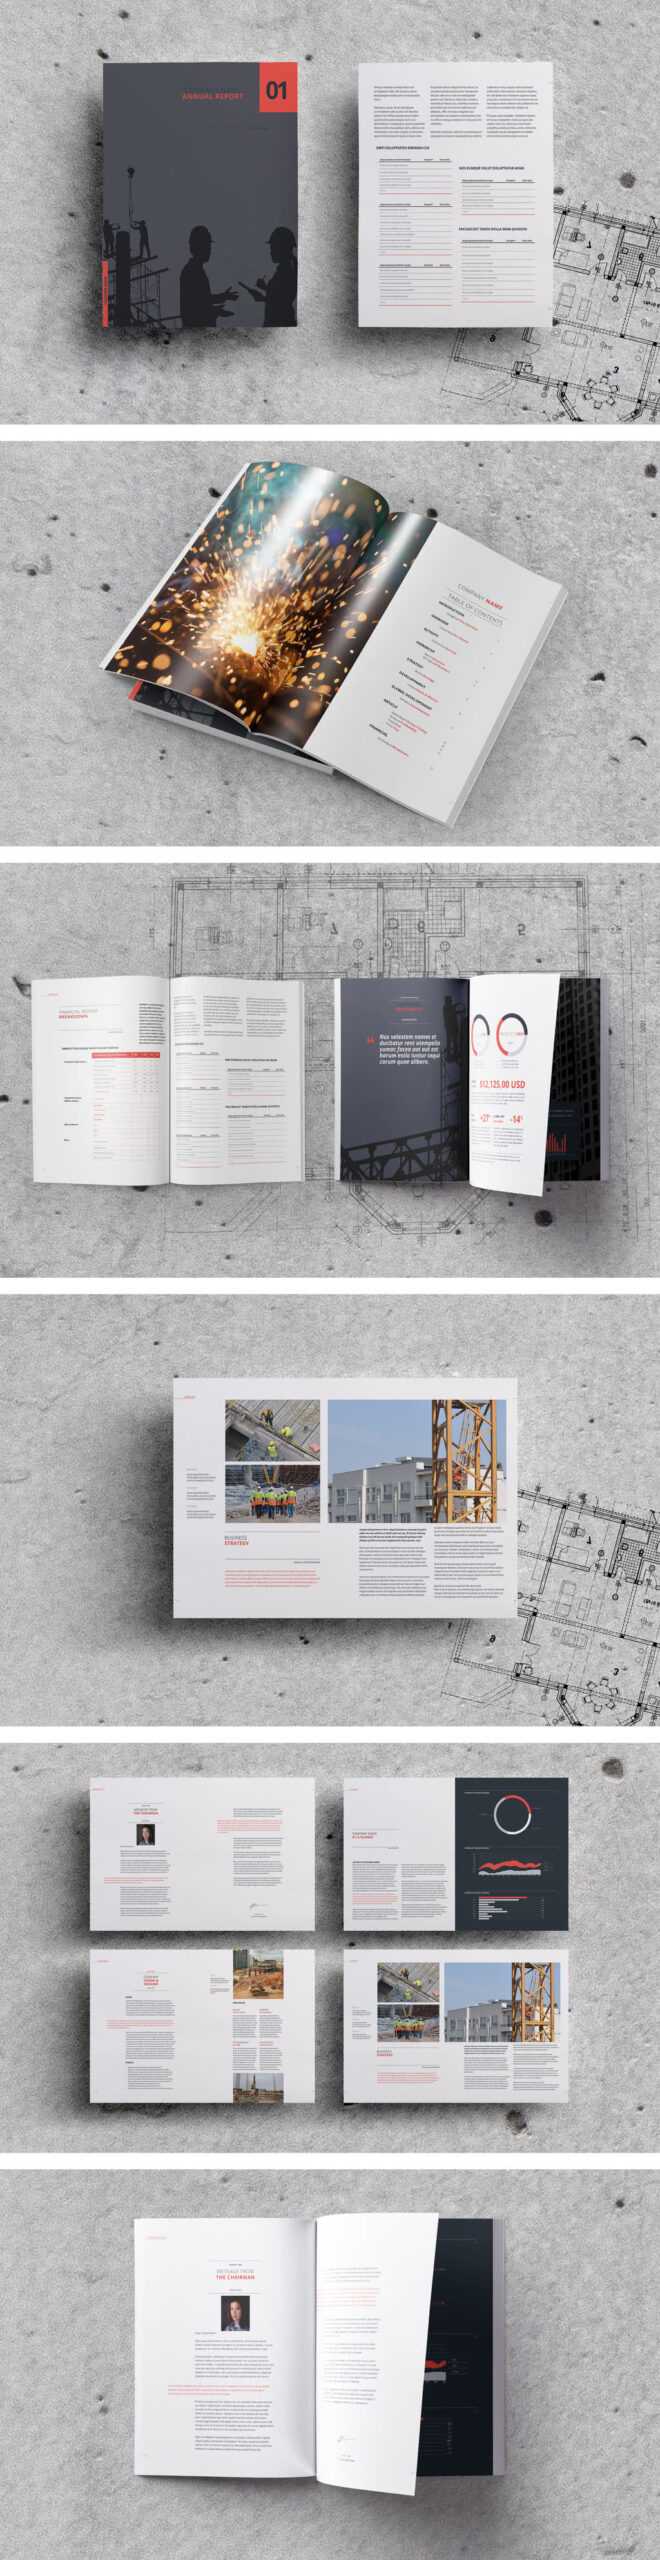 75 Fresh Indesign Templates And Where To Find More In Ind Annual Report Template